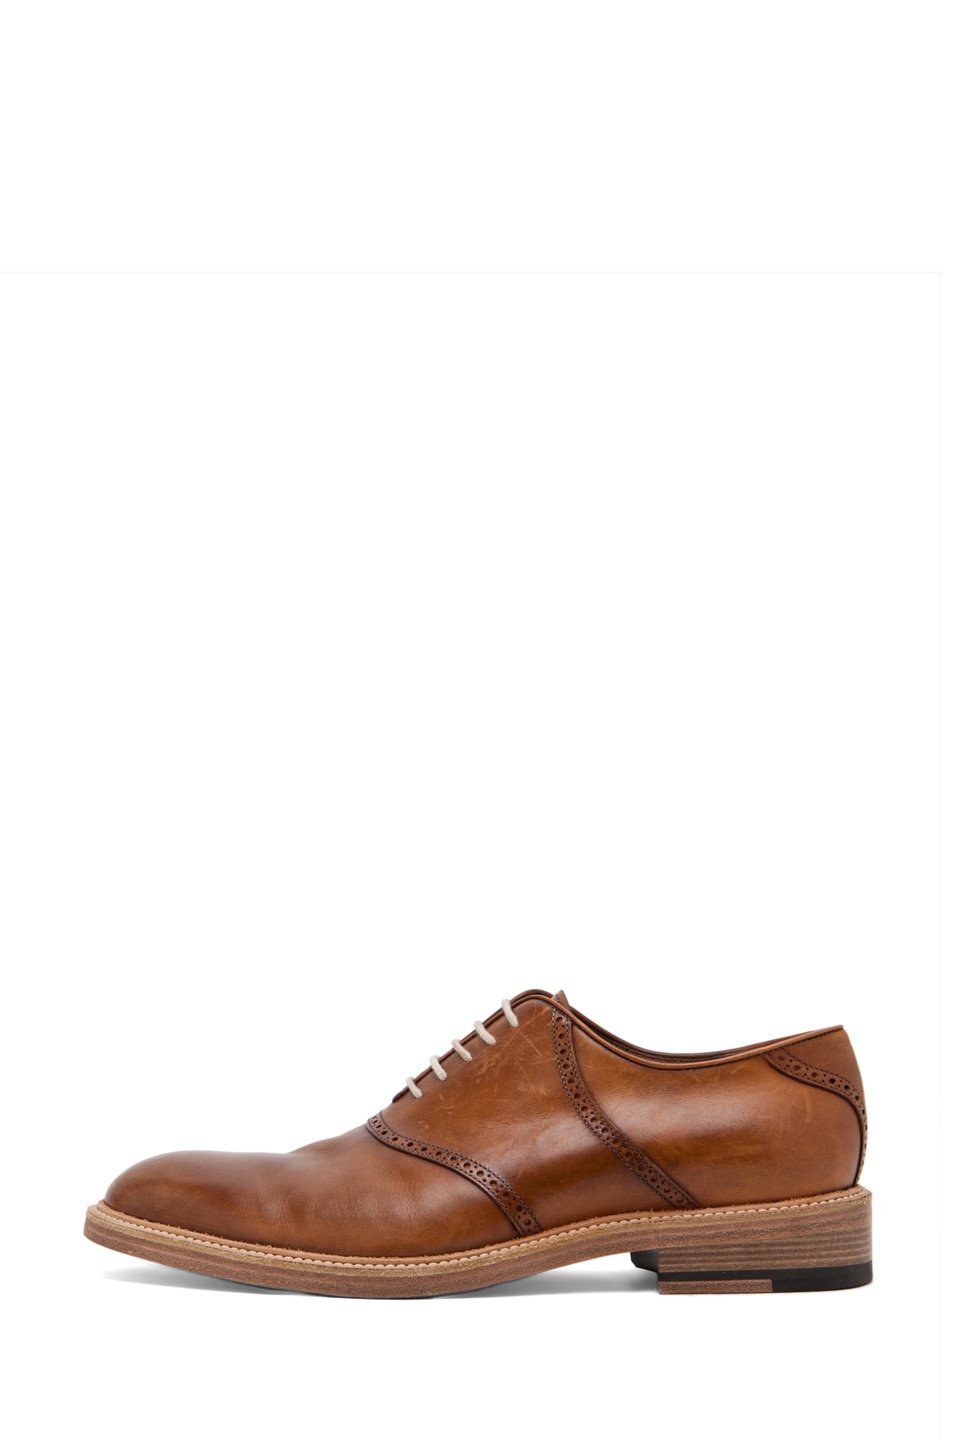 Image 1 of Band of Outsiders 5 Hole Shoe in Antique Brown Leather